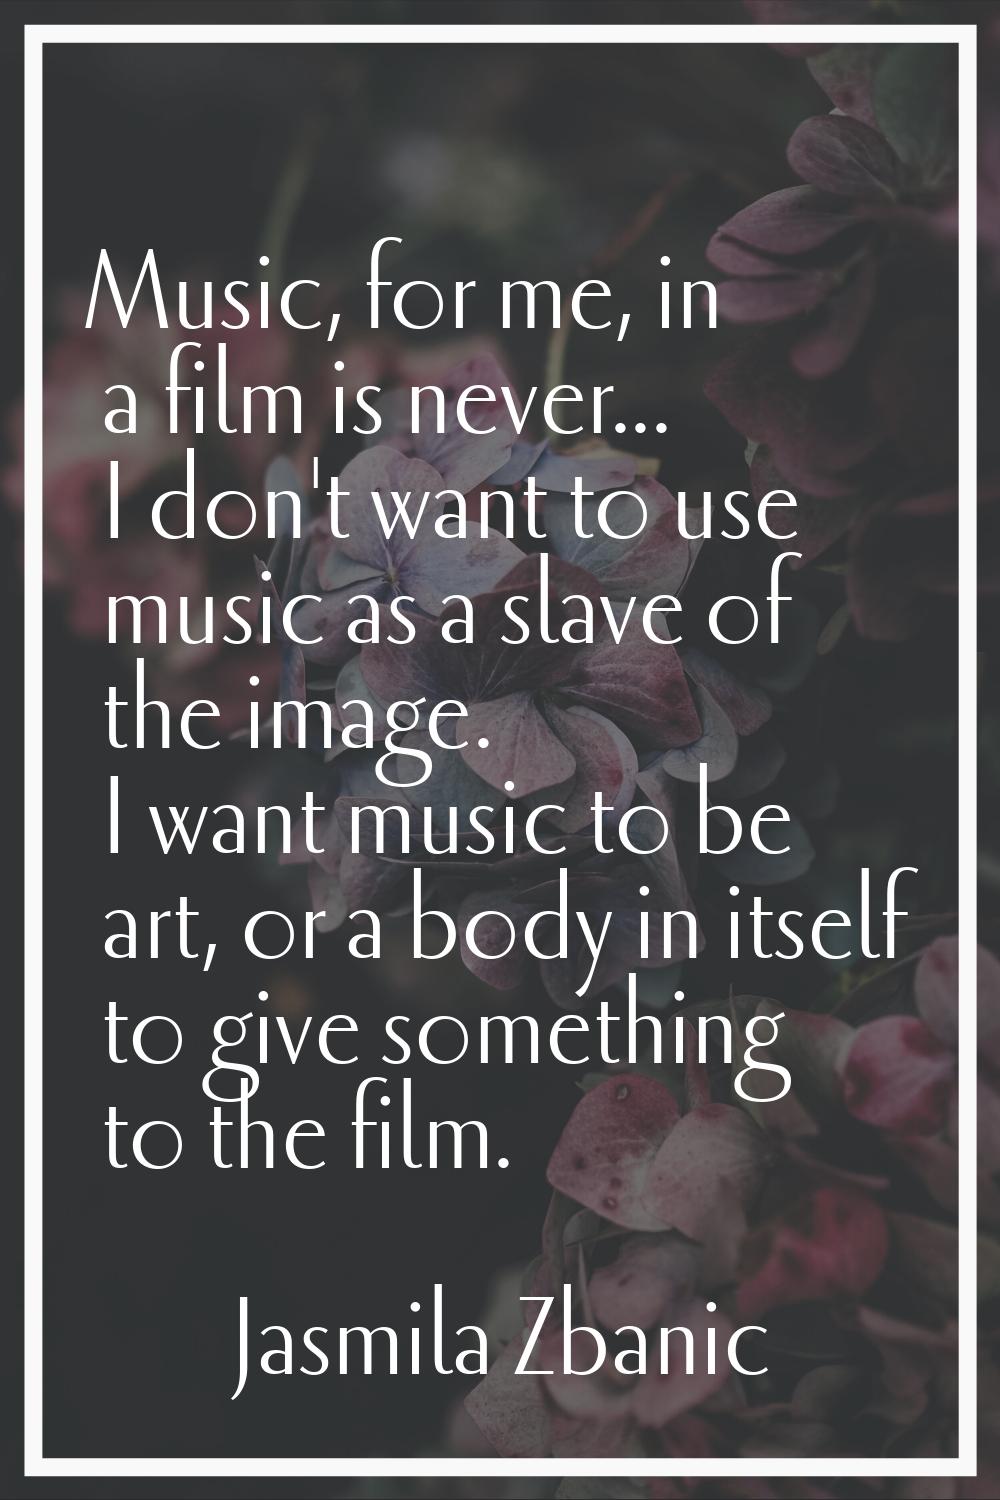 Music, for me, in a film is never... I don't want to use music as a slave of the image. I want musi